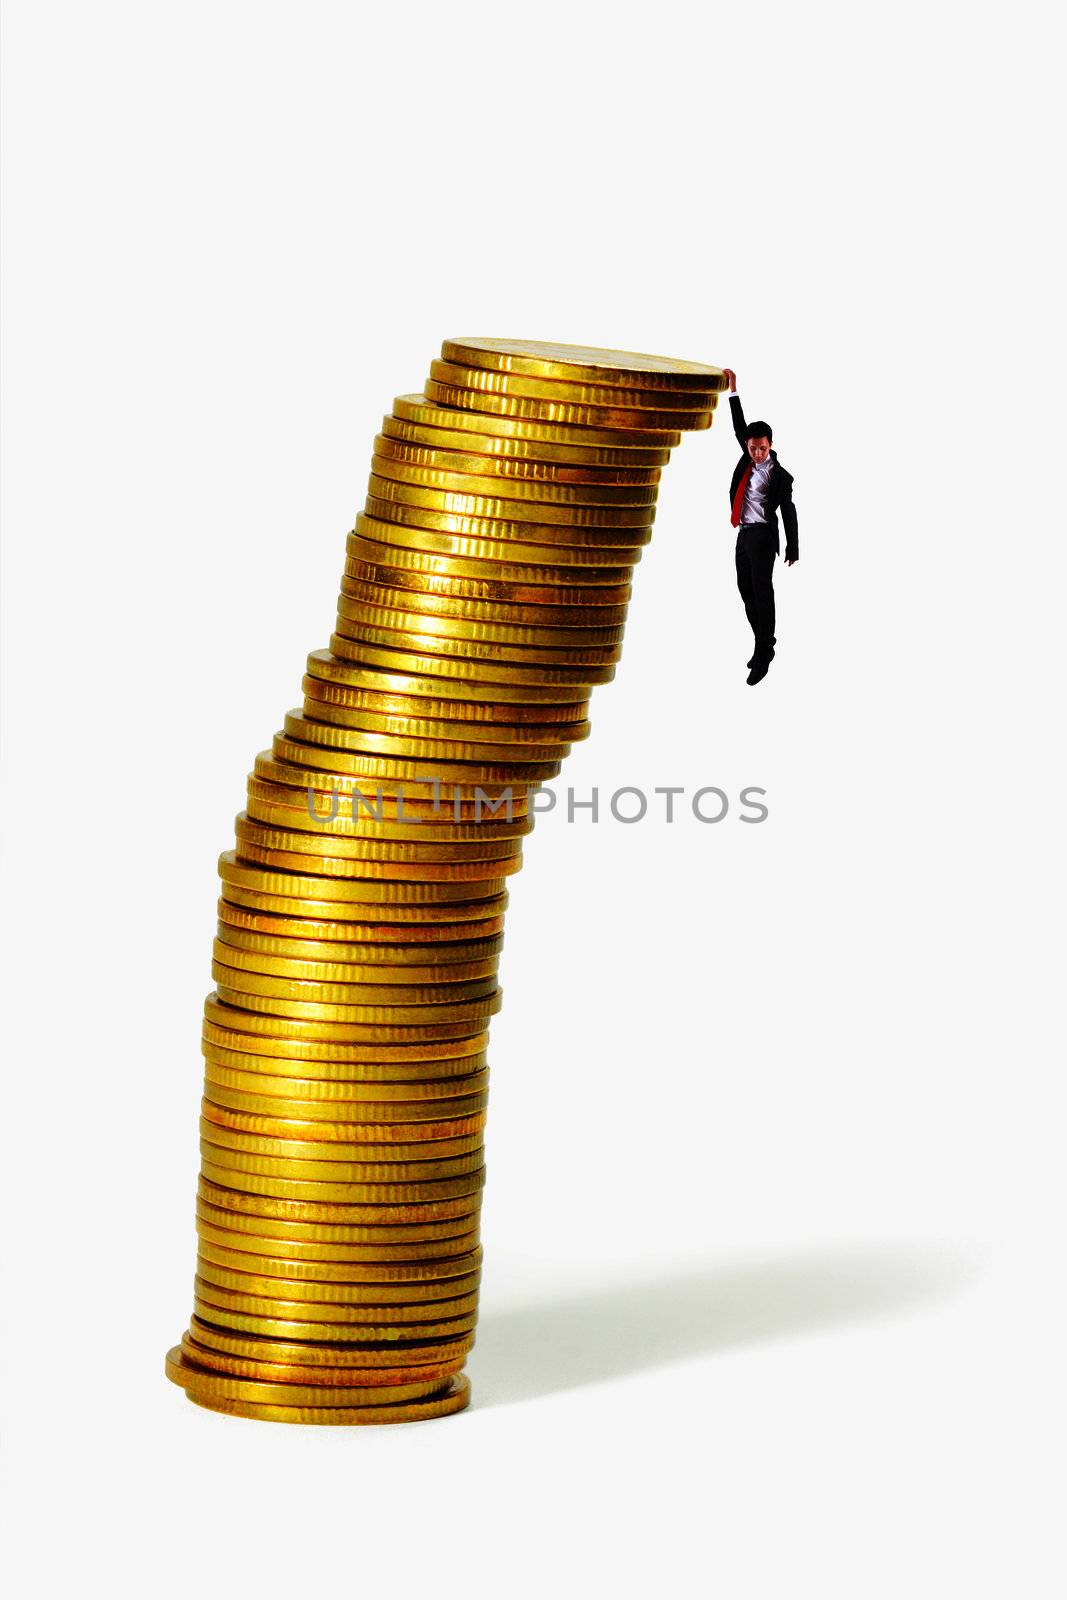 Businessman hang on Gold coin heap and looking down on ground